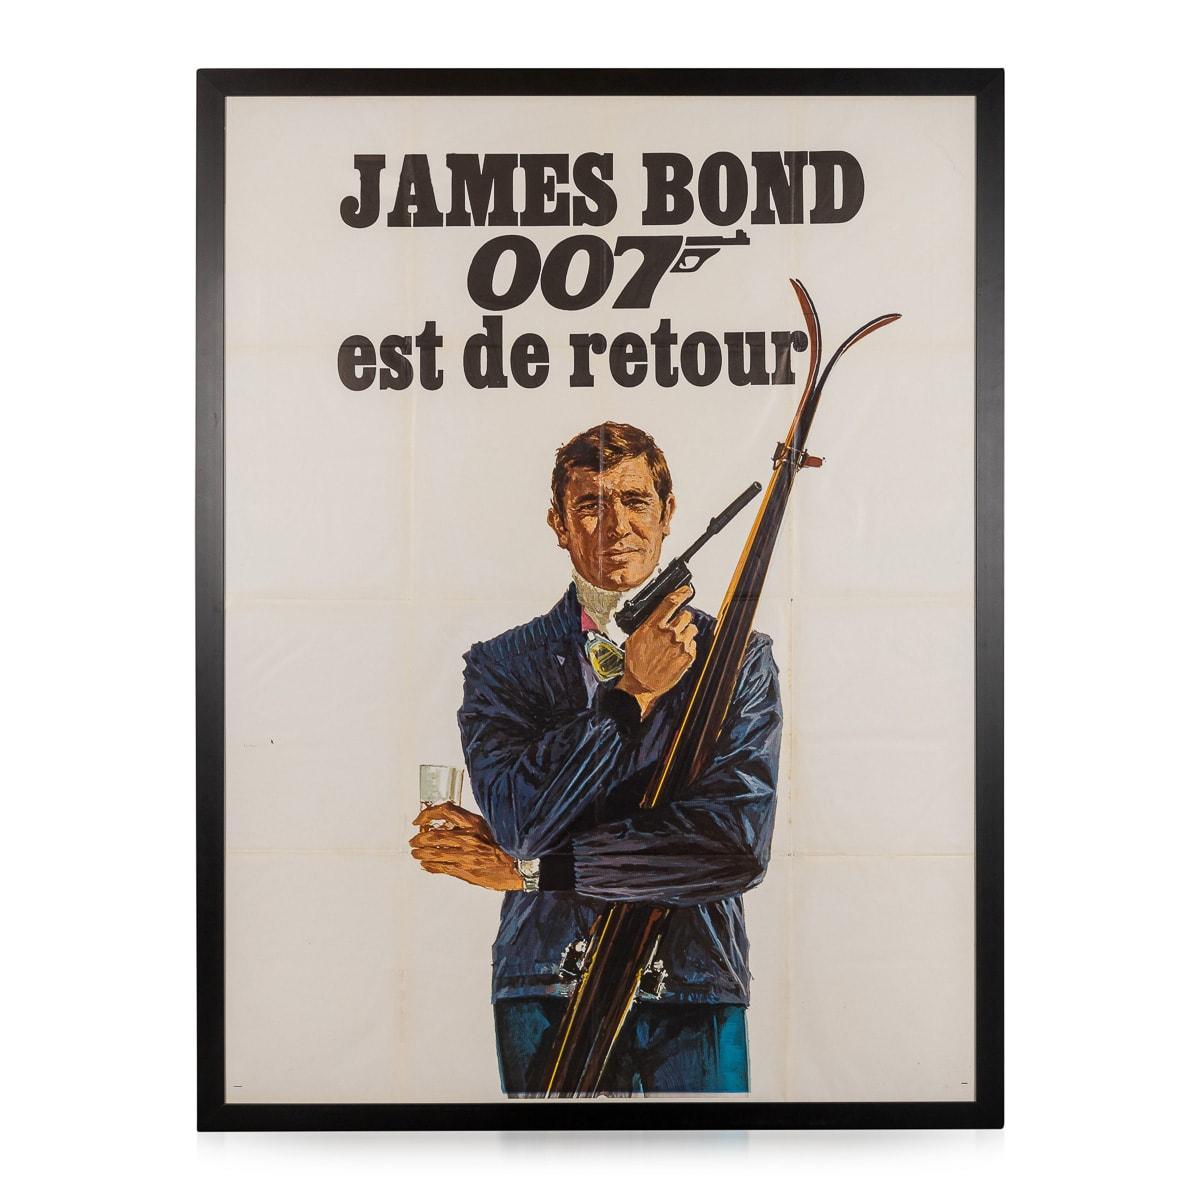 A spy film and the sixth in the James Bond series produced by Eon Productions. It is based on the 1963 novel by Ian Fleming. Following Sean Connery's decision to retire from the role after You Only Live Twice, Eon Productions selected George